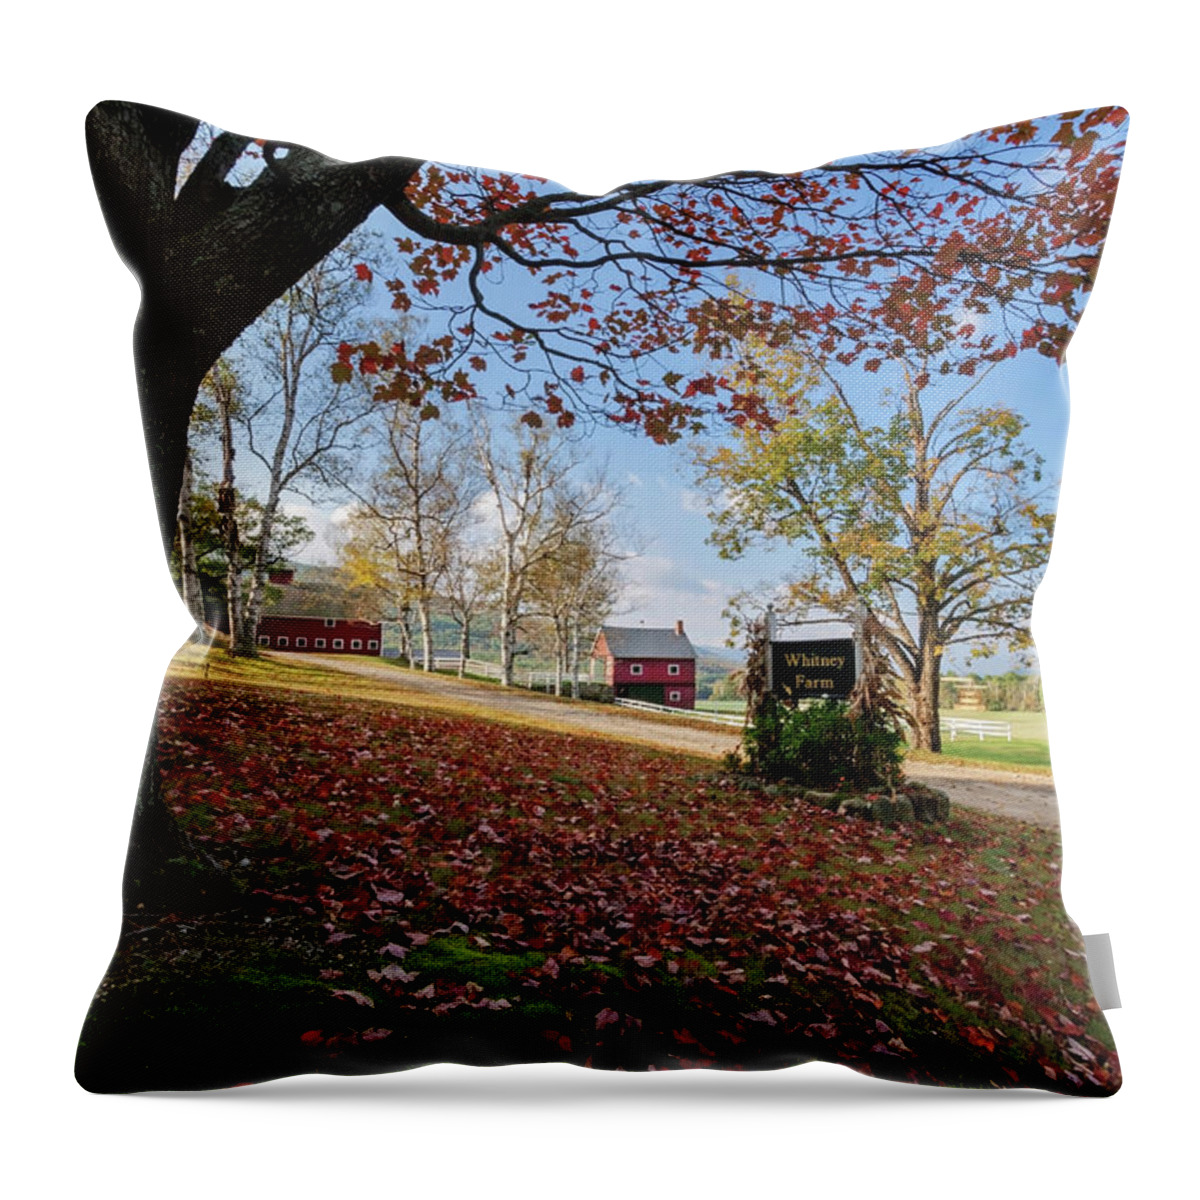 Landscape Throw Pillow featuring the photograph Whitney Farm by Brett Pelletier